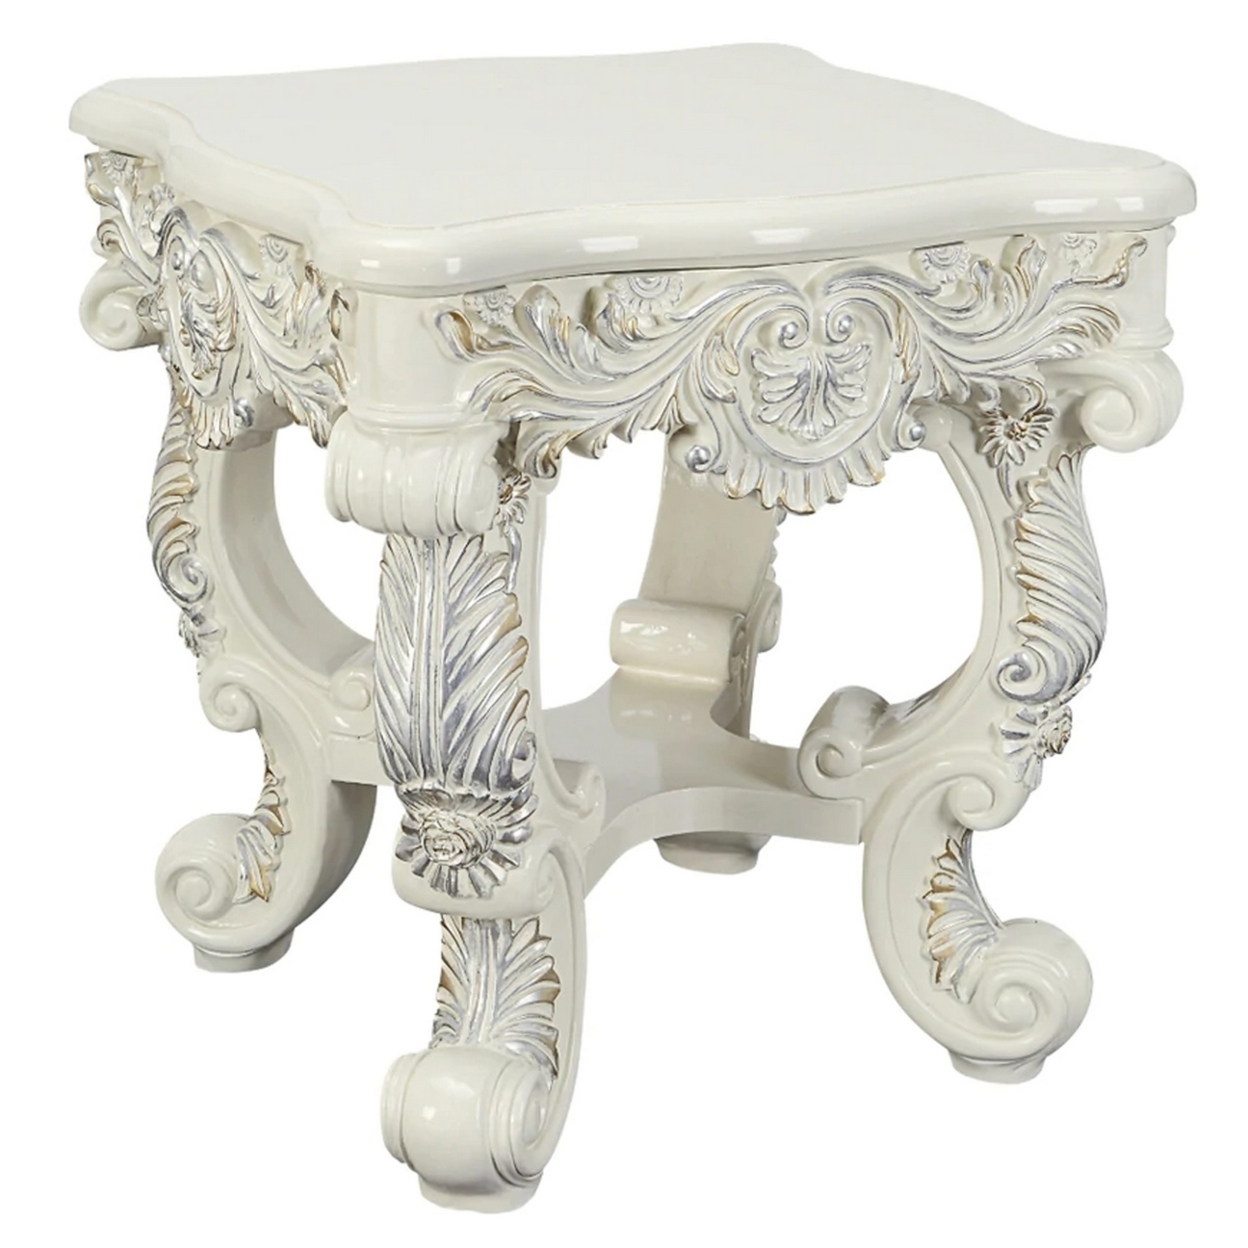 Ataa 28 Inch Square End Table, Ornate Floral Carvings, Claw Feet, White- Saltoro Sherpi